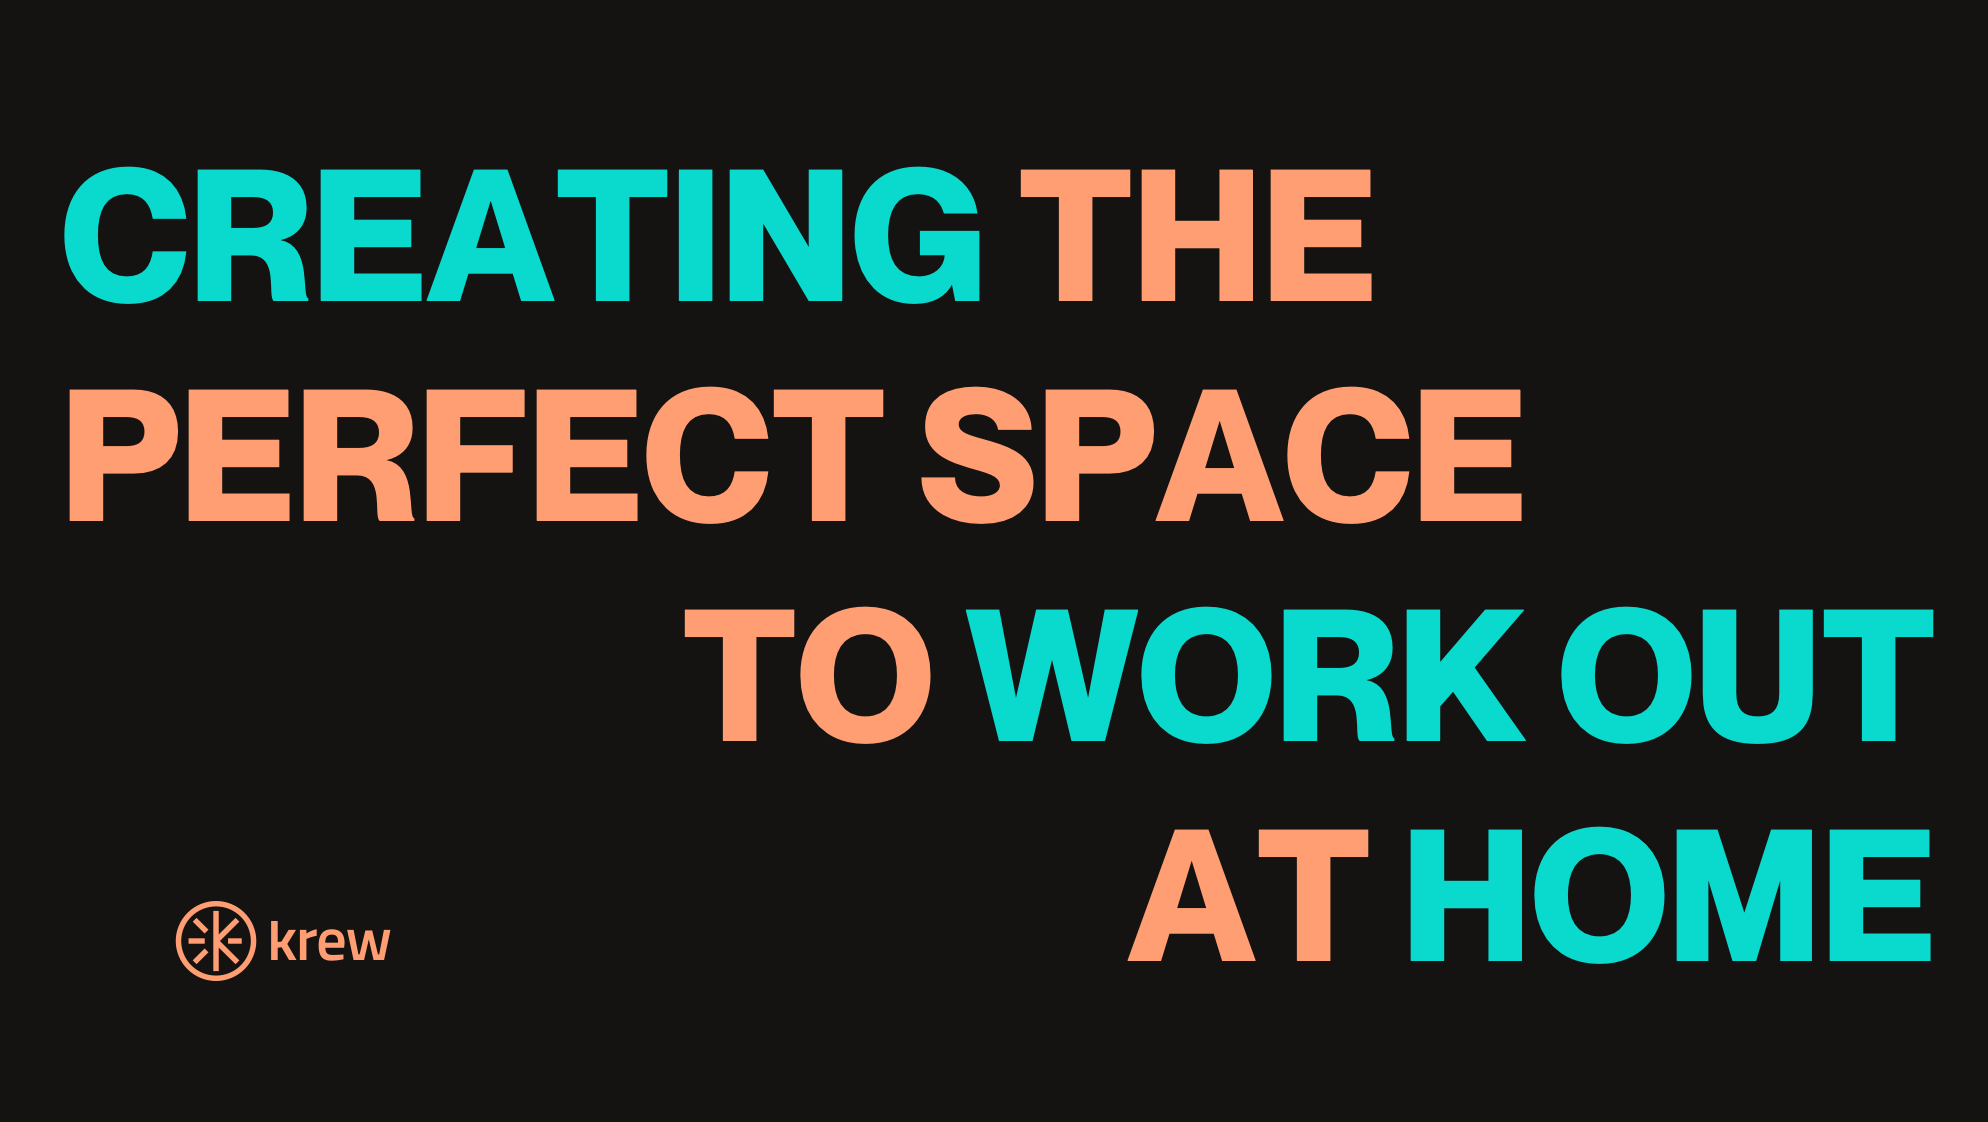 Creating the perfect space to work out at home